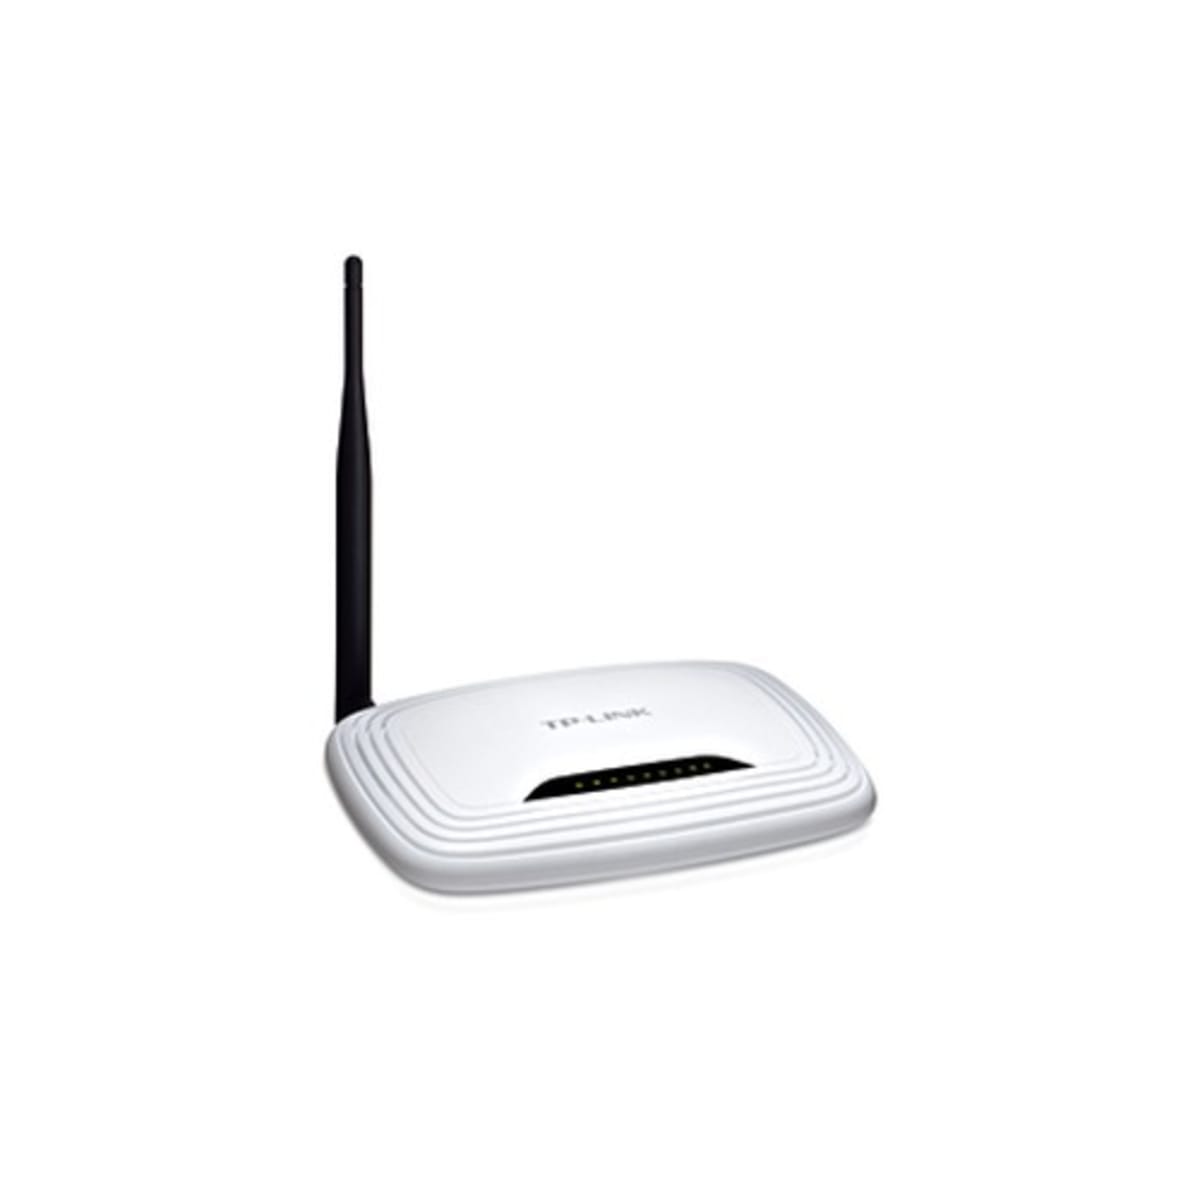 TL-WR740N, 150Mbps Wireless N Router